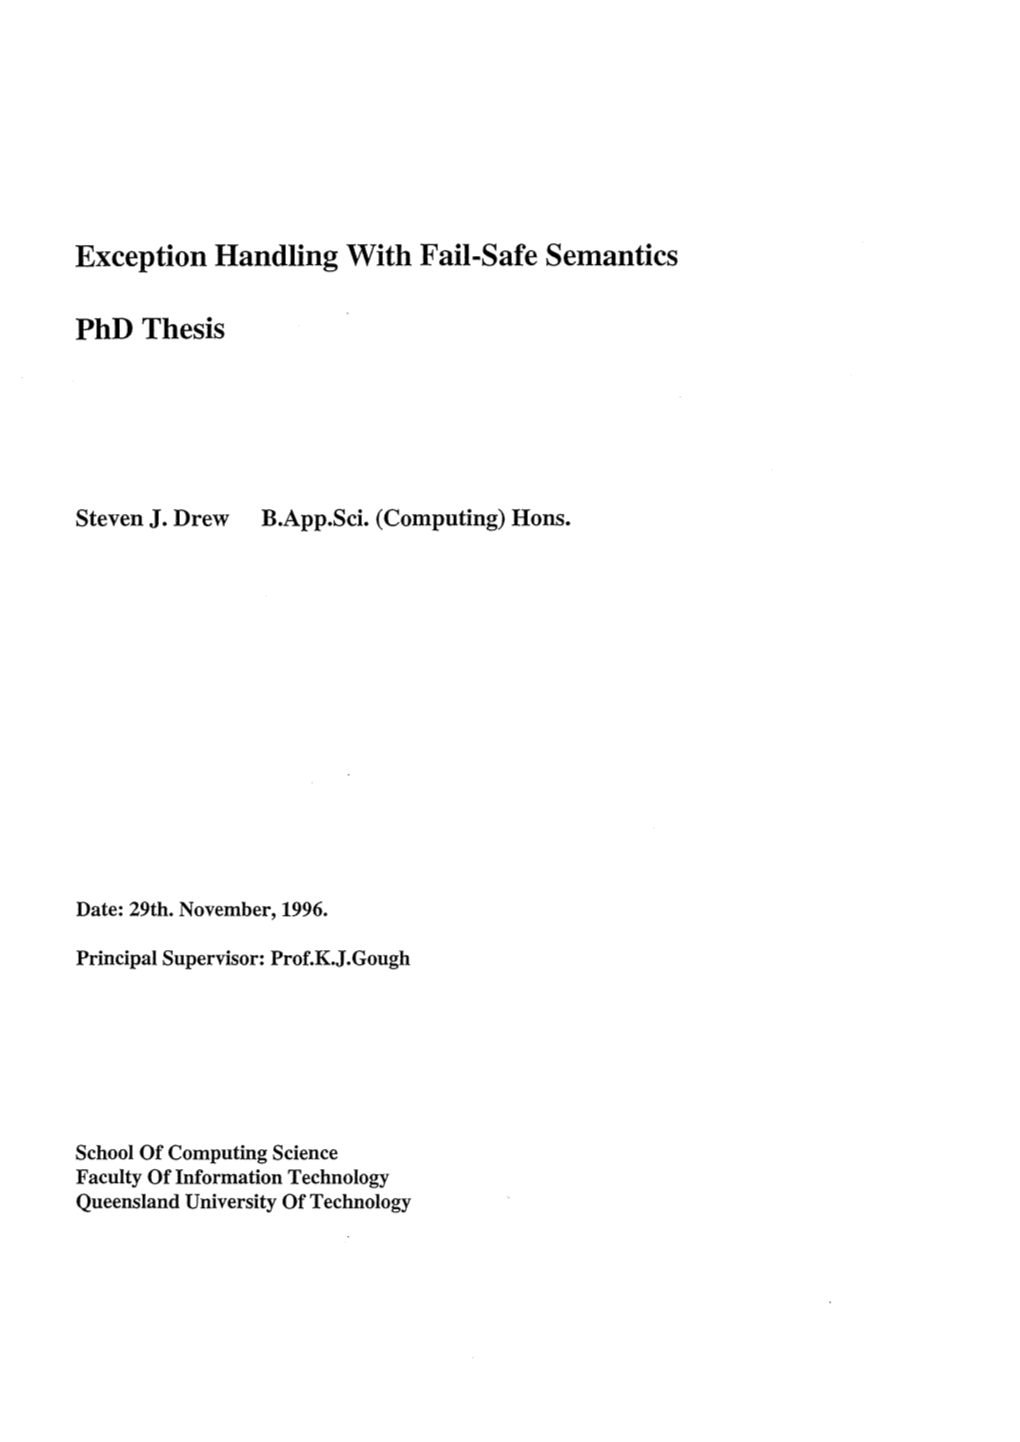 Exception Handling with Fail-Safe Semantics Phd Thesis